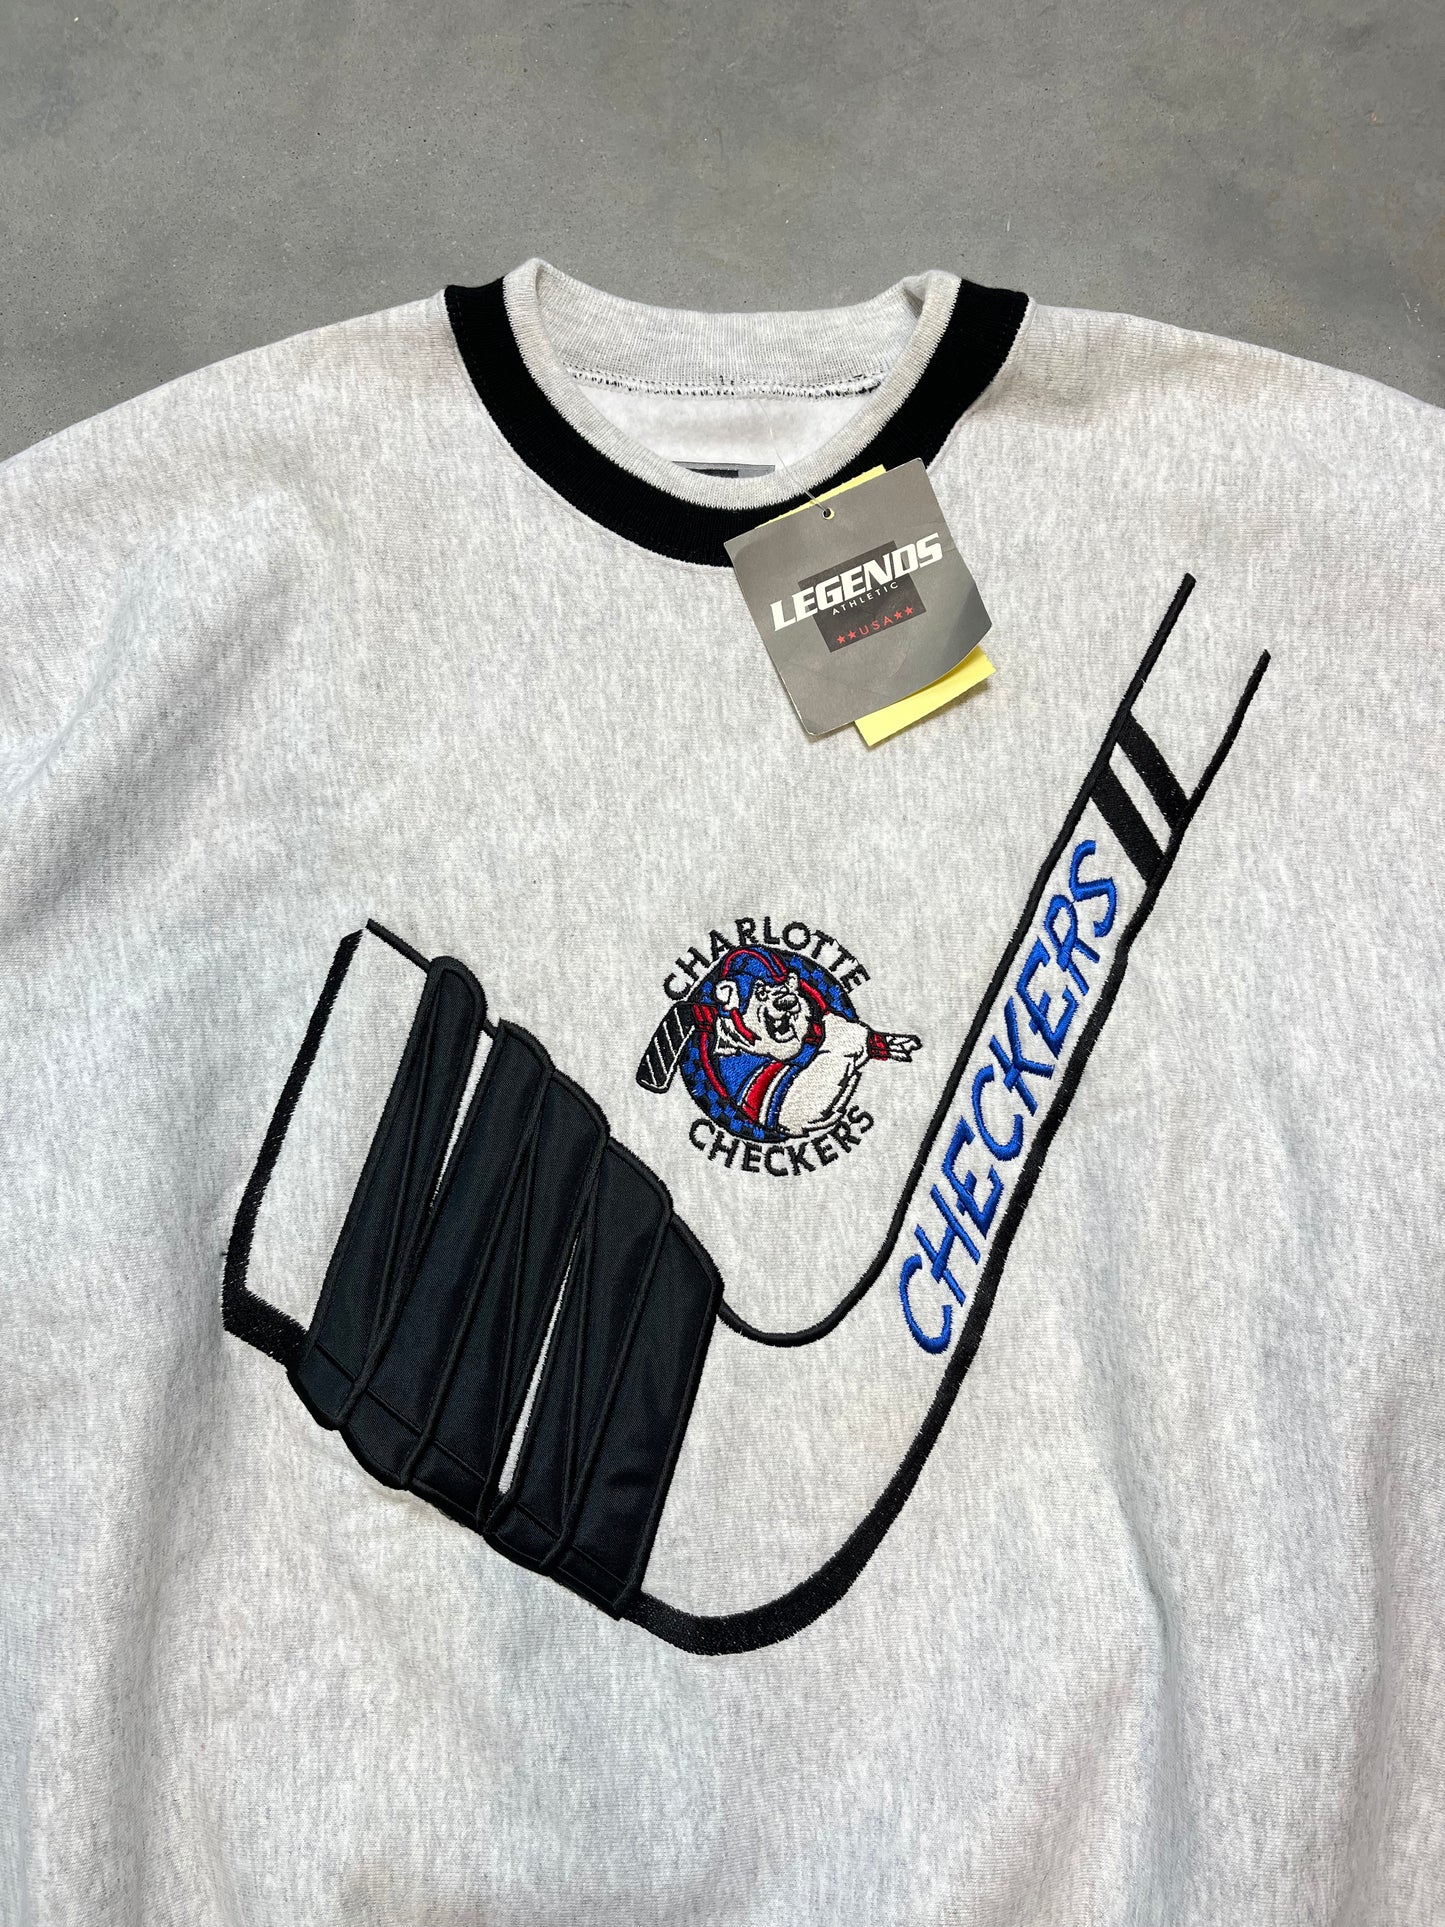 90’s Charlotte Checkers Vintage Legends ECHL Hockey Embroidered Crewneck - Deadstock (XXL)